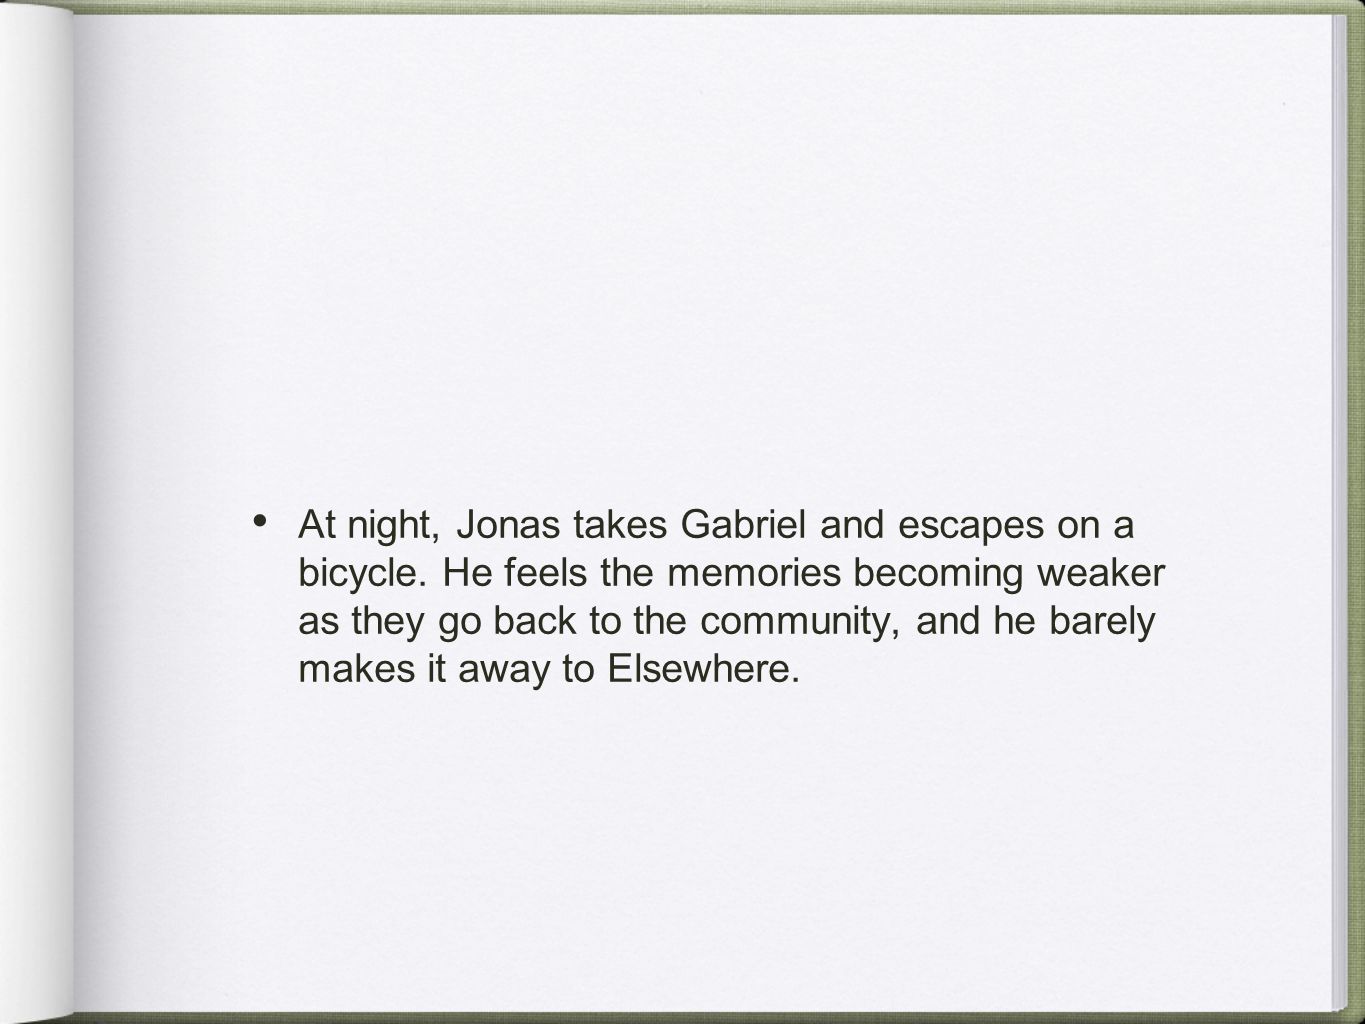 At night, Jonas takes Gabriel and escapes on a bicycle.